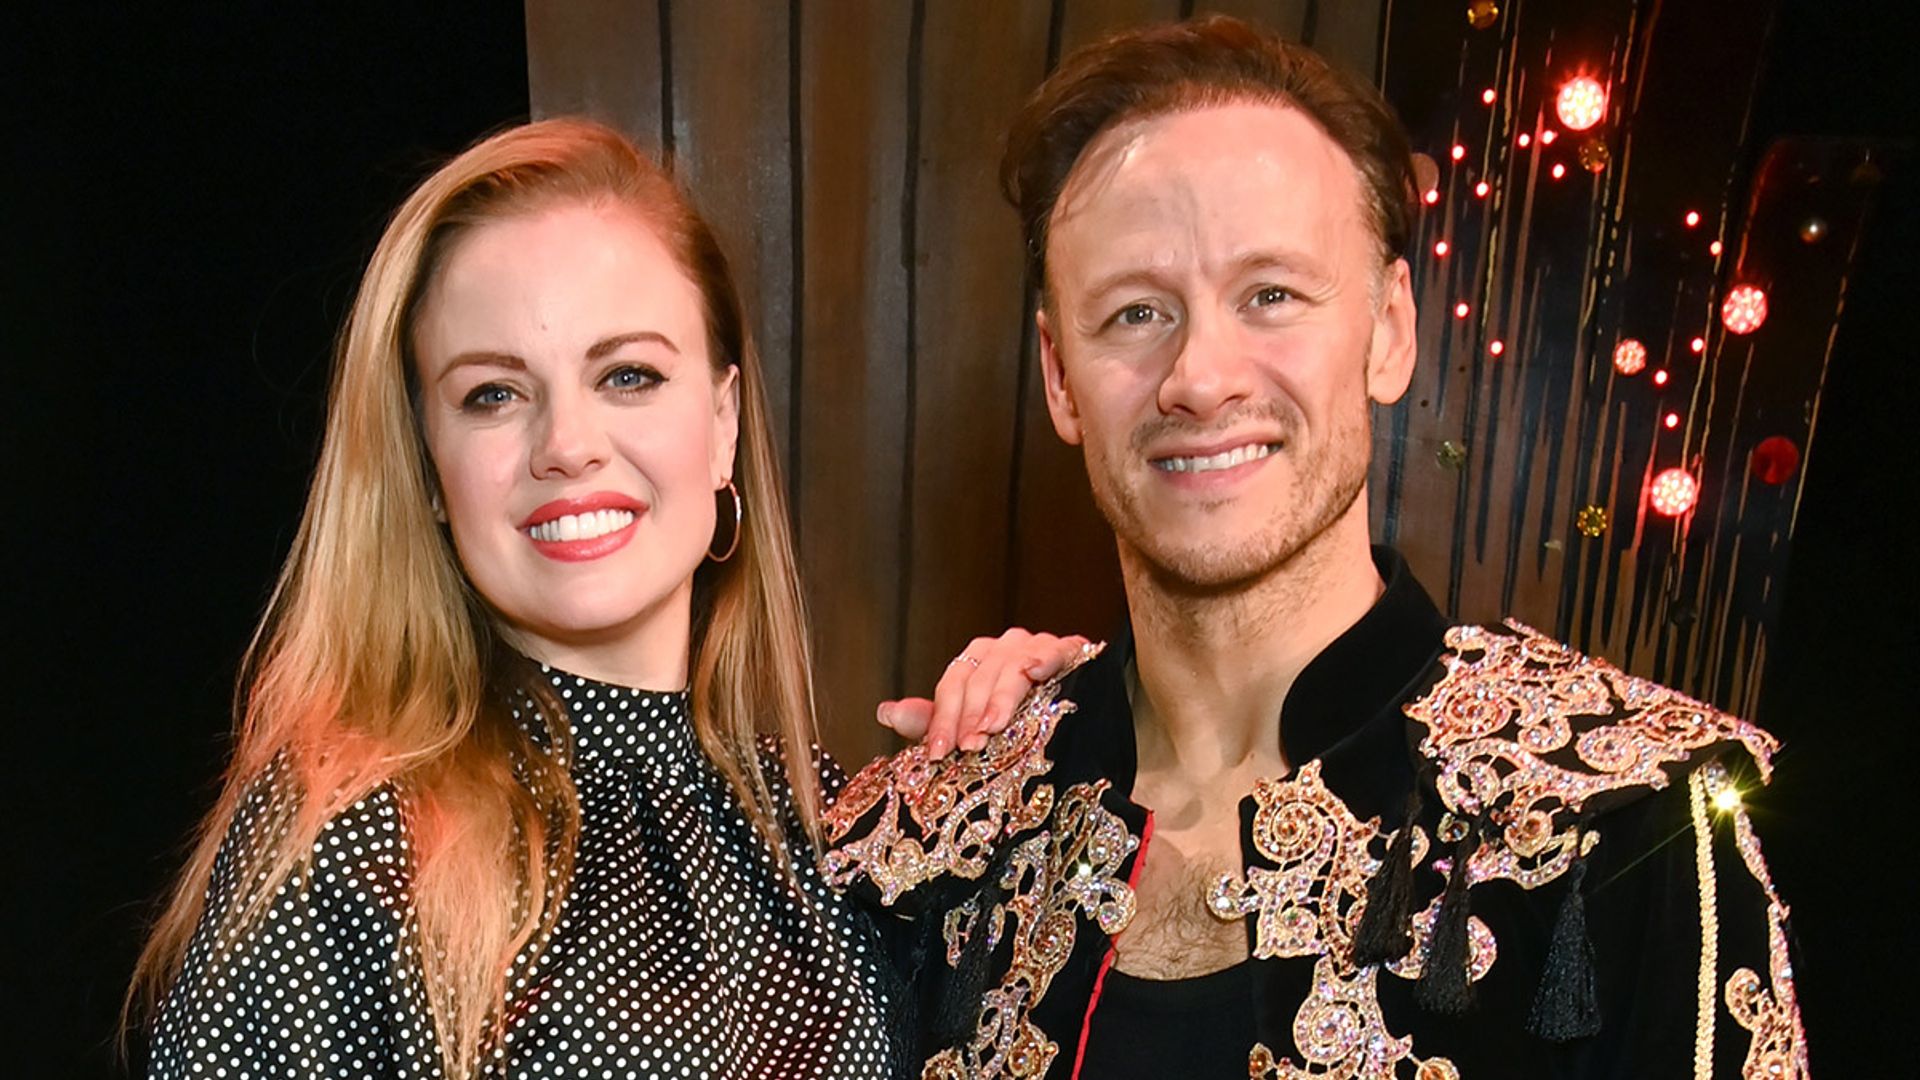 Kevin Clifton's sister Joanne shares sweet post after Stacey Dooley welcomes baby girl